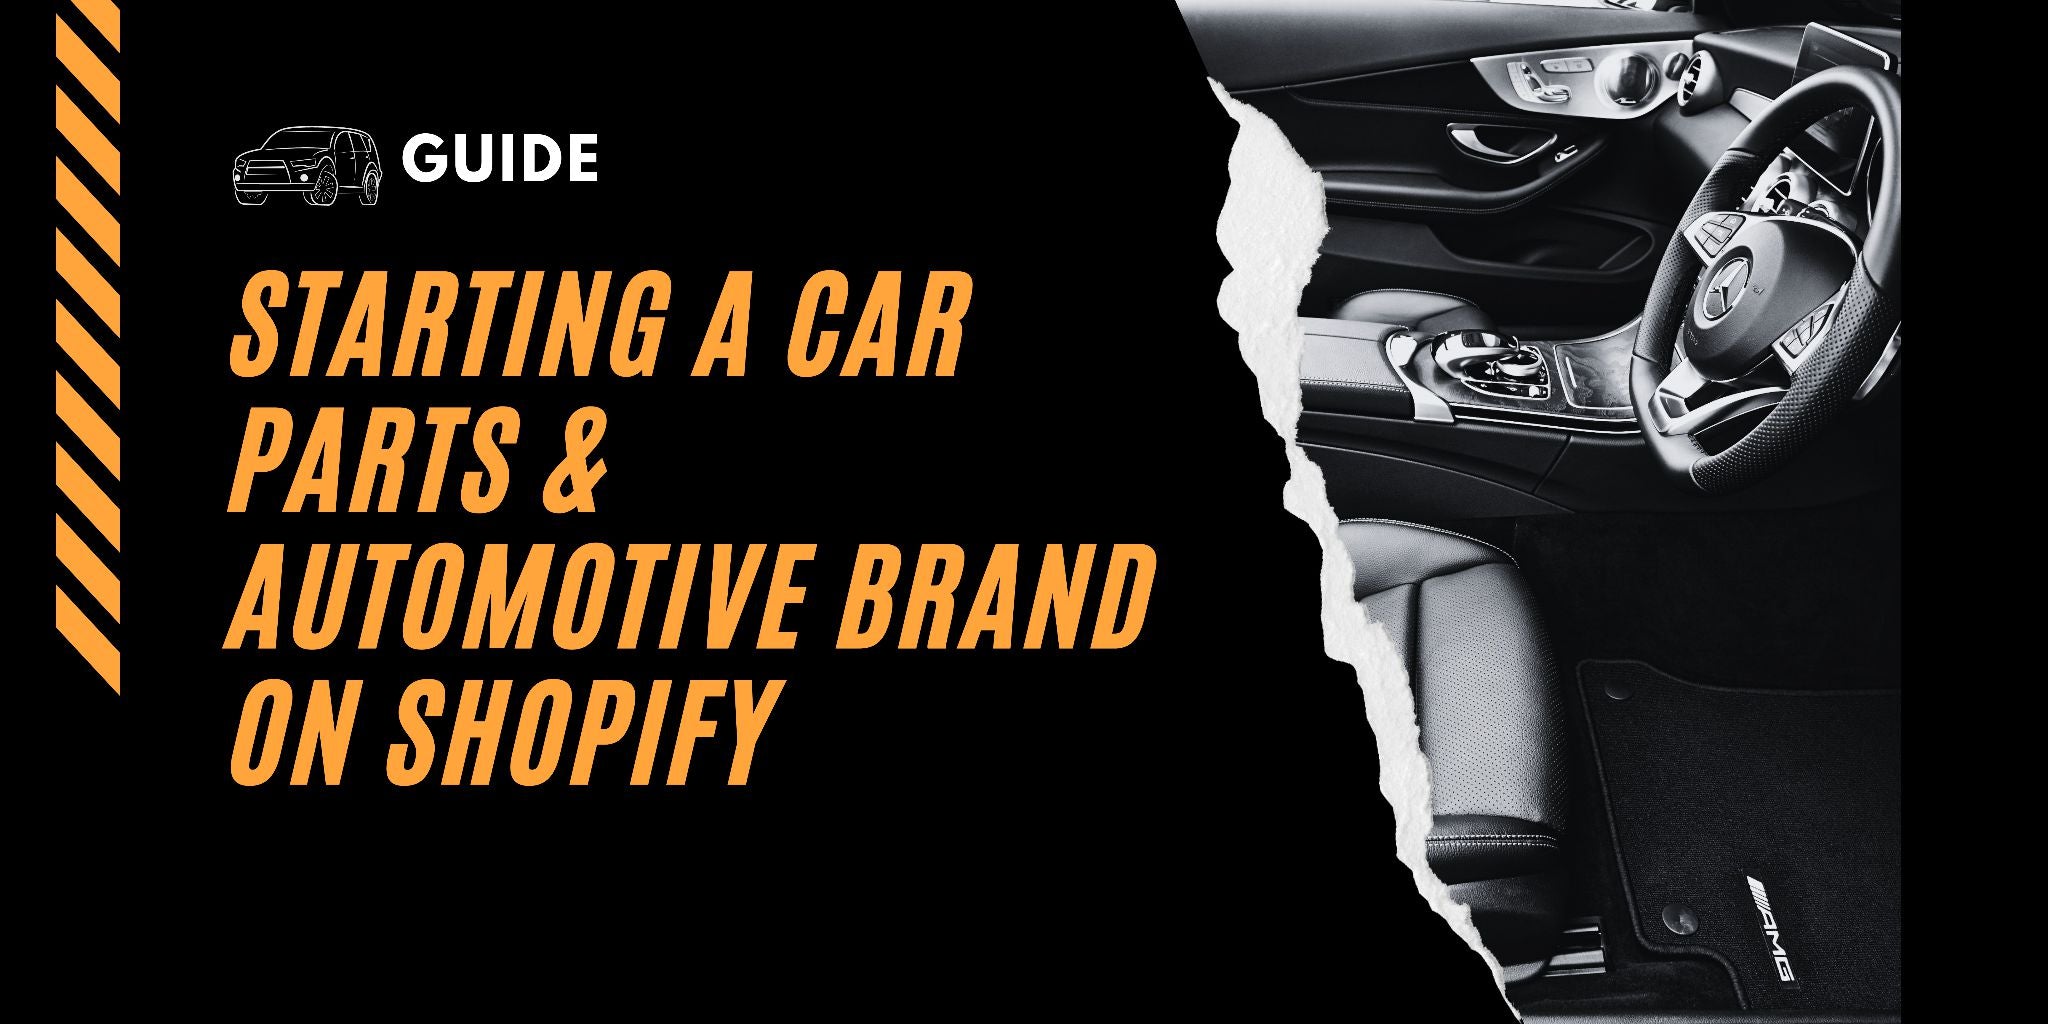 Guide: Starting a Car Parts & Automotive Brand on Shopify – Webinopoly